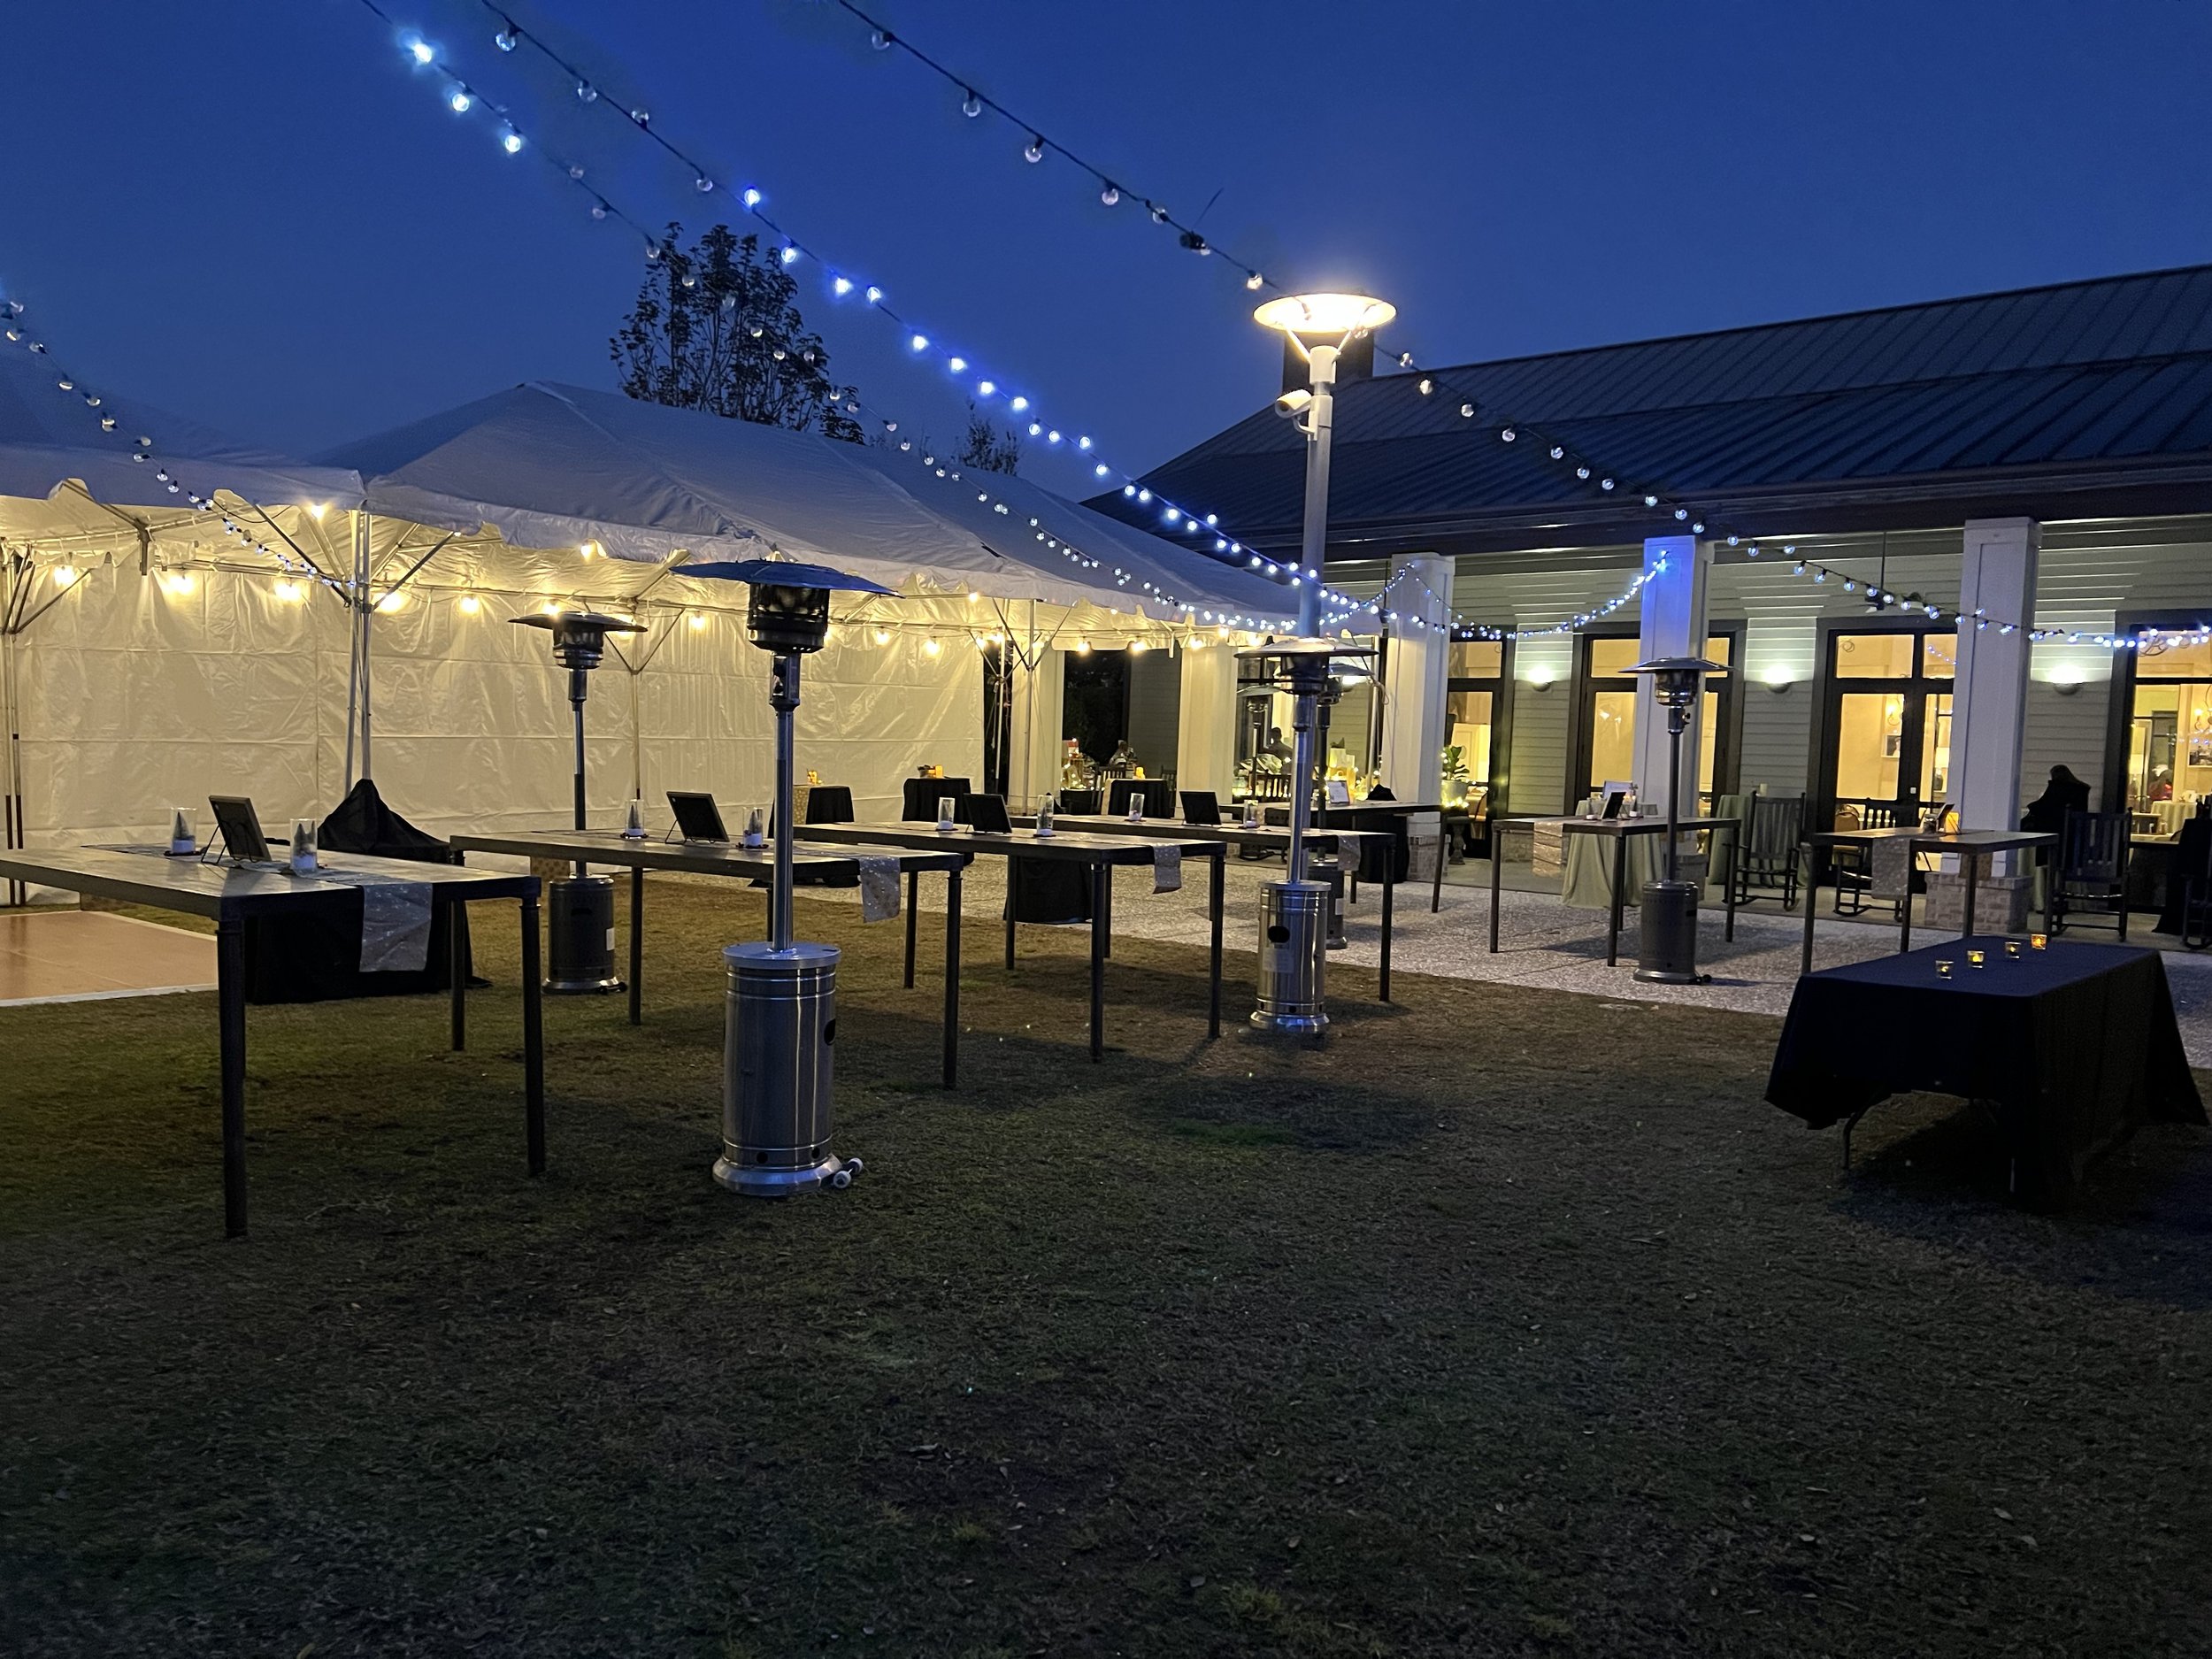 large-party-event-tent-hughes-event-rentals-charleston-sc-31.jpeg